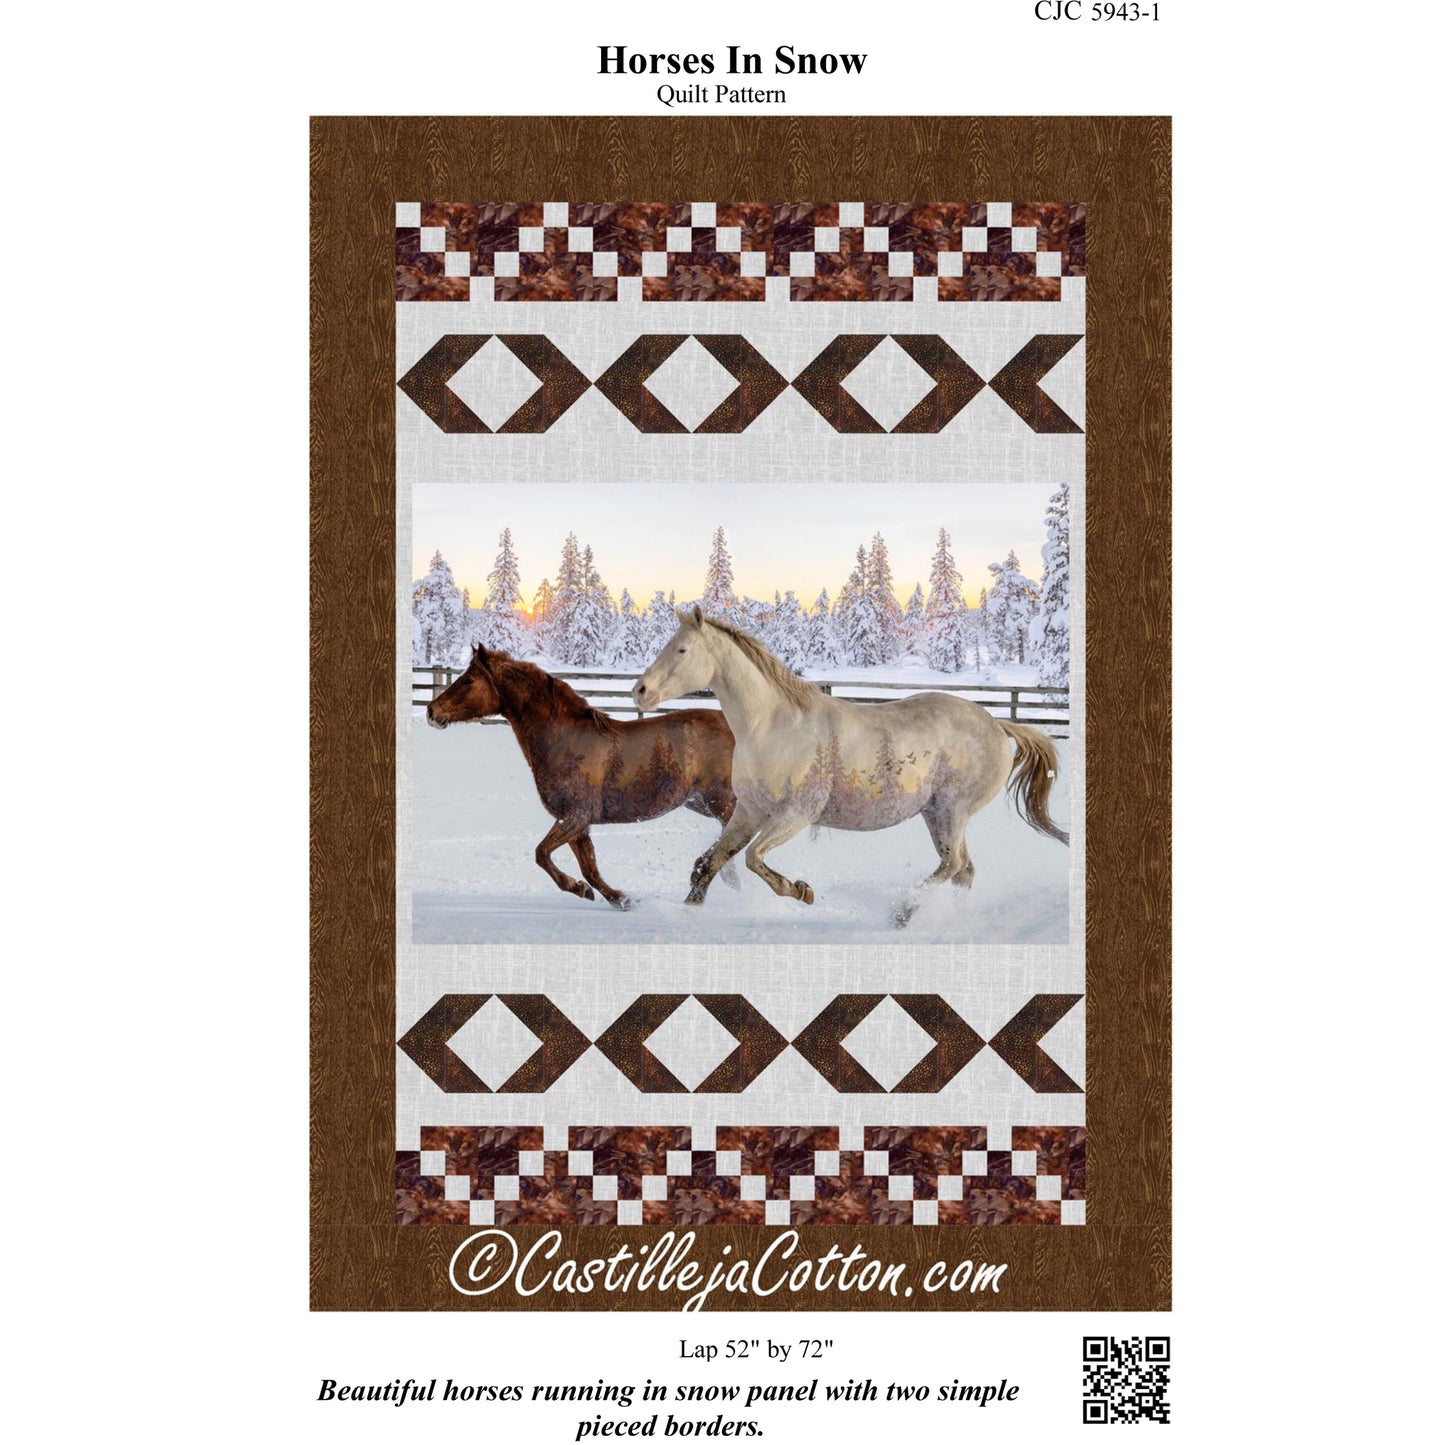 Horses in Snow Quilt CJC-59431e - Downloadable Pattern